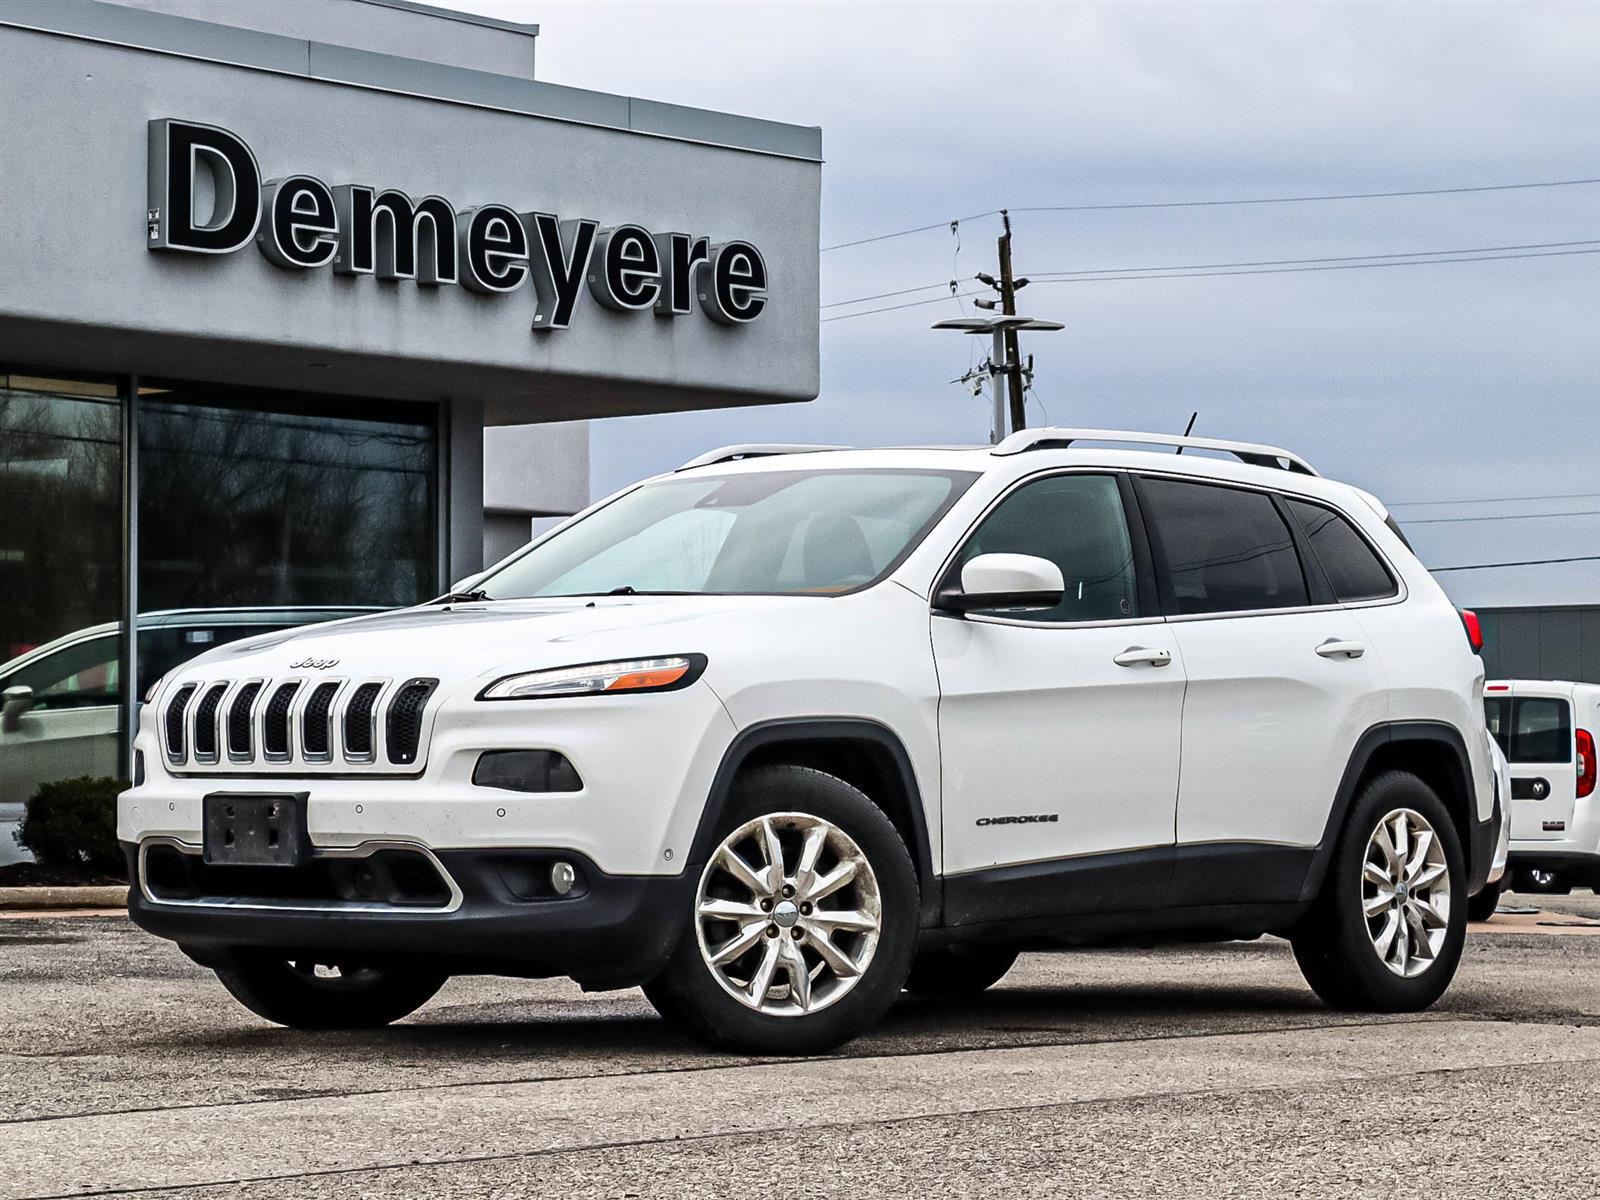 2015 Jeep Cherokee Limited 4WD  You Certify, You Save - OR - Buy Cert